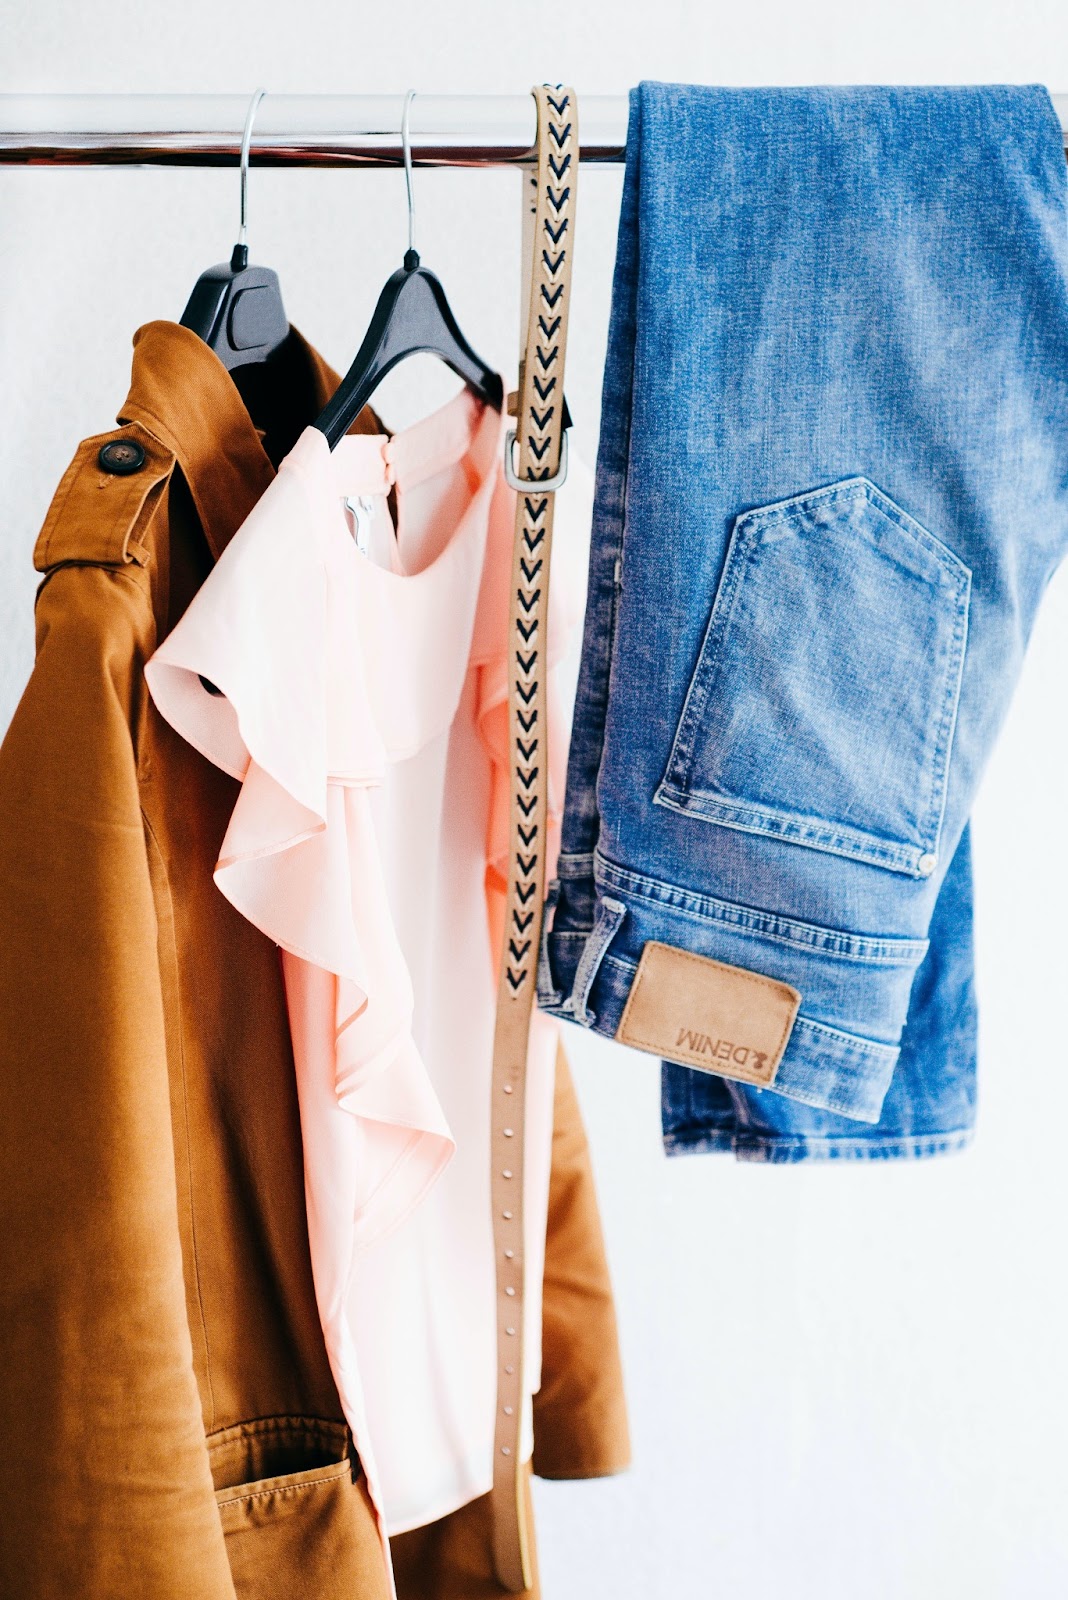 Versatile pieces of clothing hung on a rack to pack for travel. 